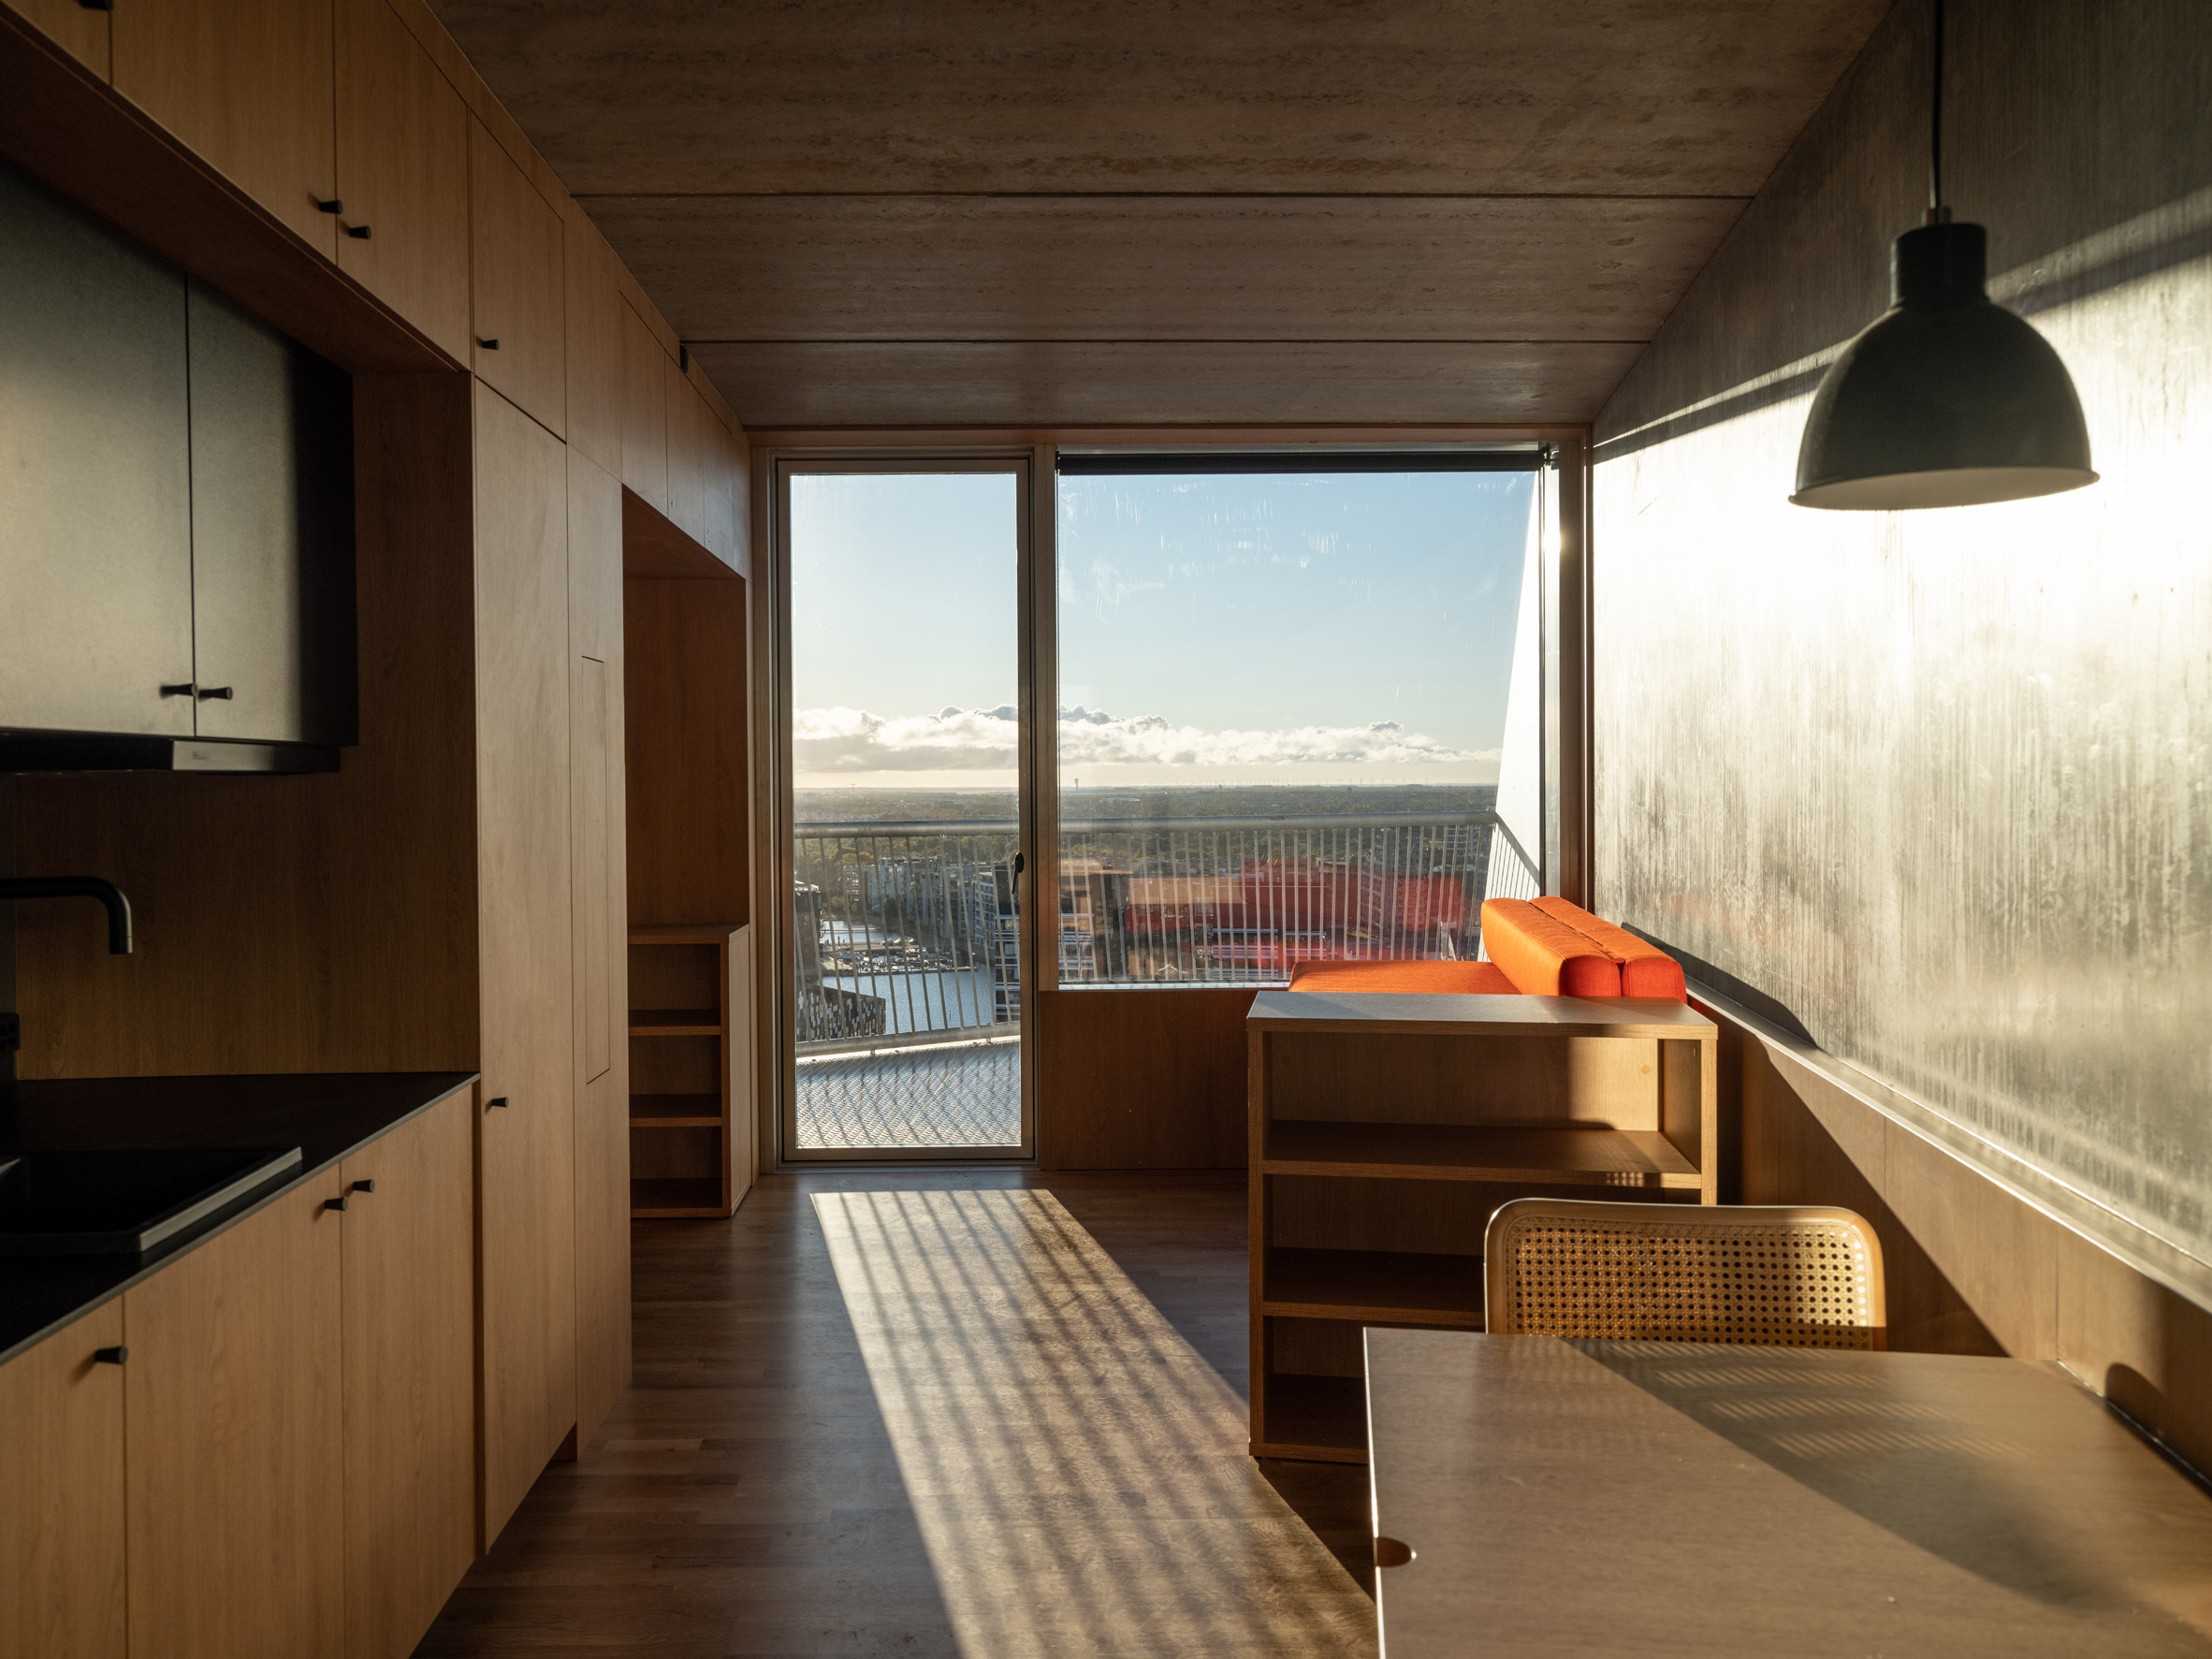 Apartment inside one of the Kaktus Towers by BIG